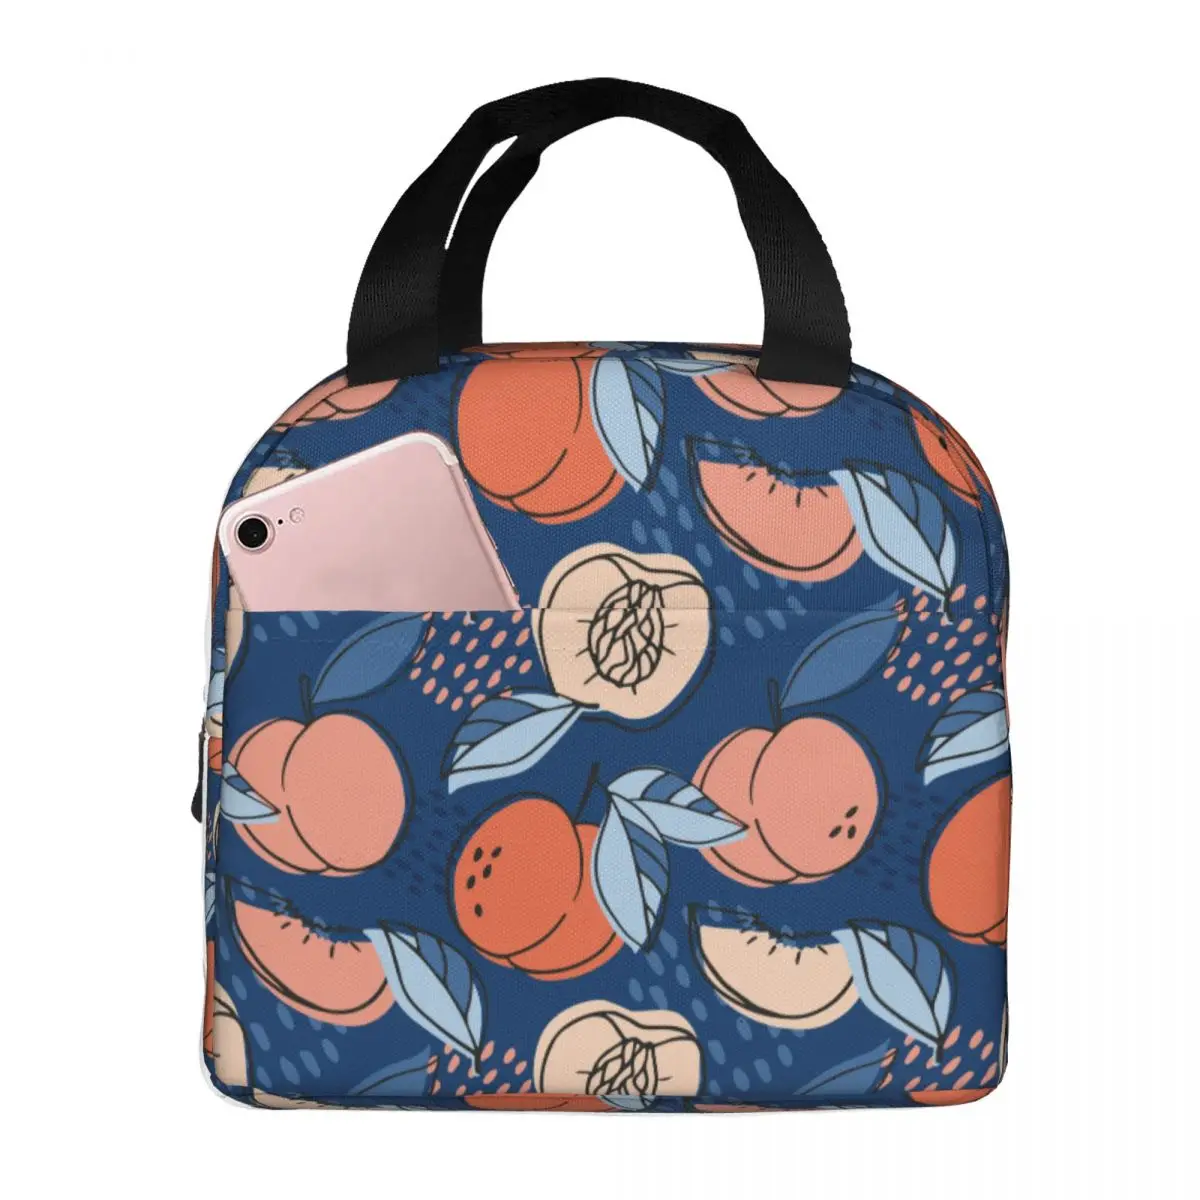 Lunch Bags for Women Kids Floral Peach Insulated Cooler Waterproof Picnic School Fruit Oxford Lunch Box Bento Pouch